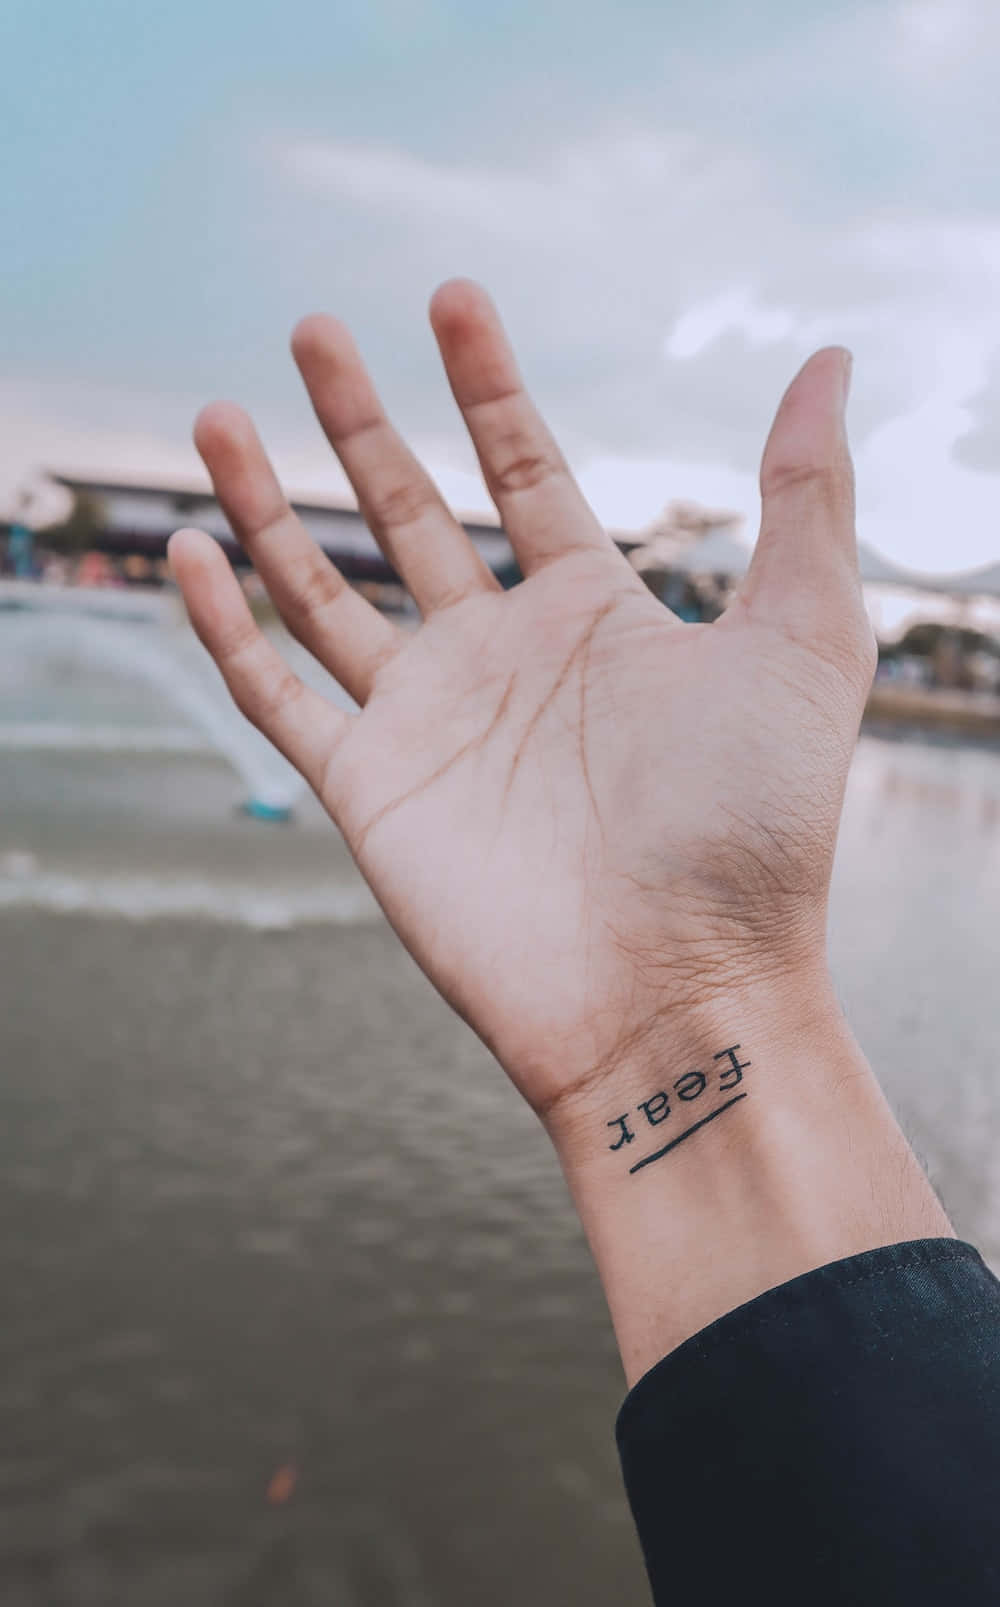 Download A Person's Hand With A Tattoo On It | Wallpapers.com